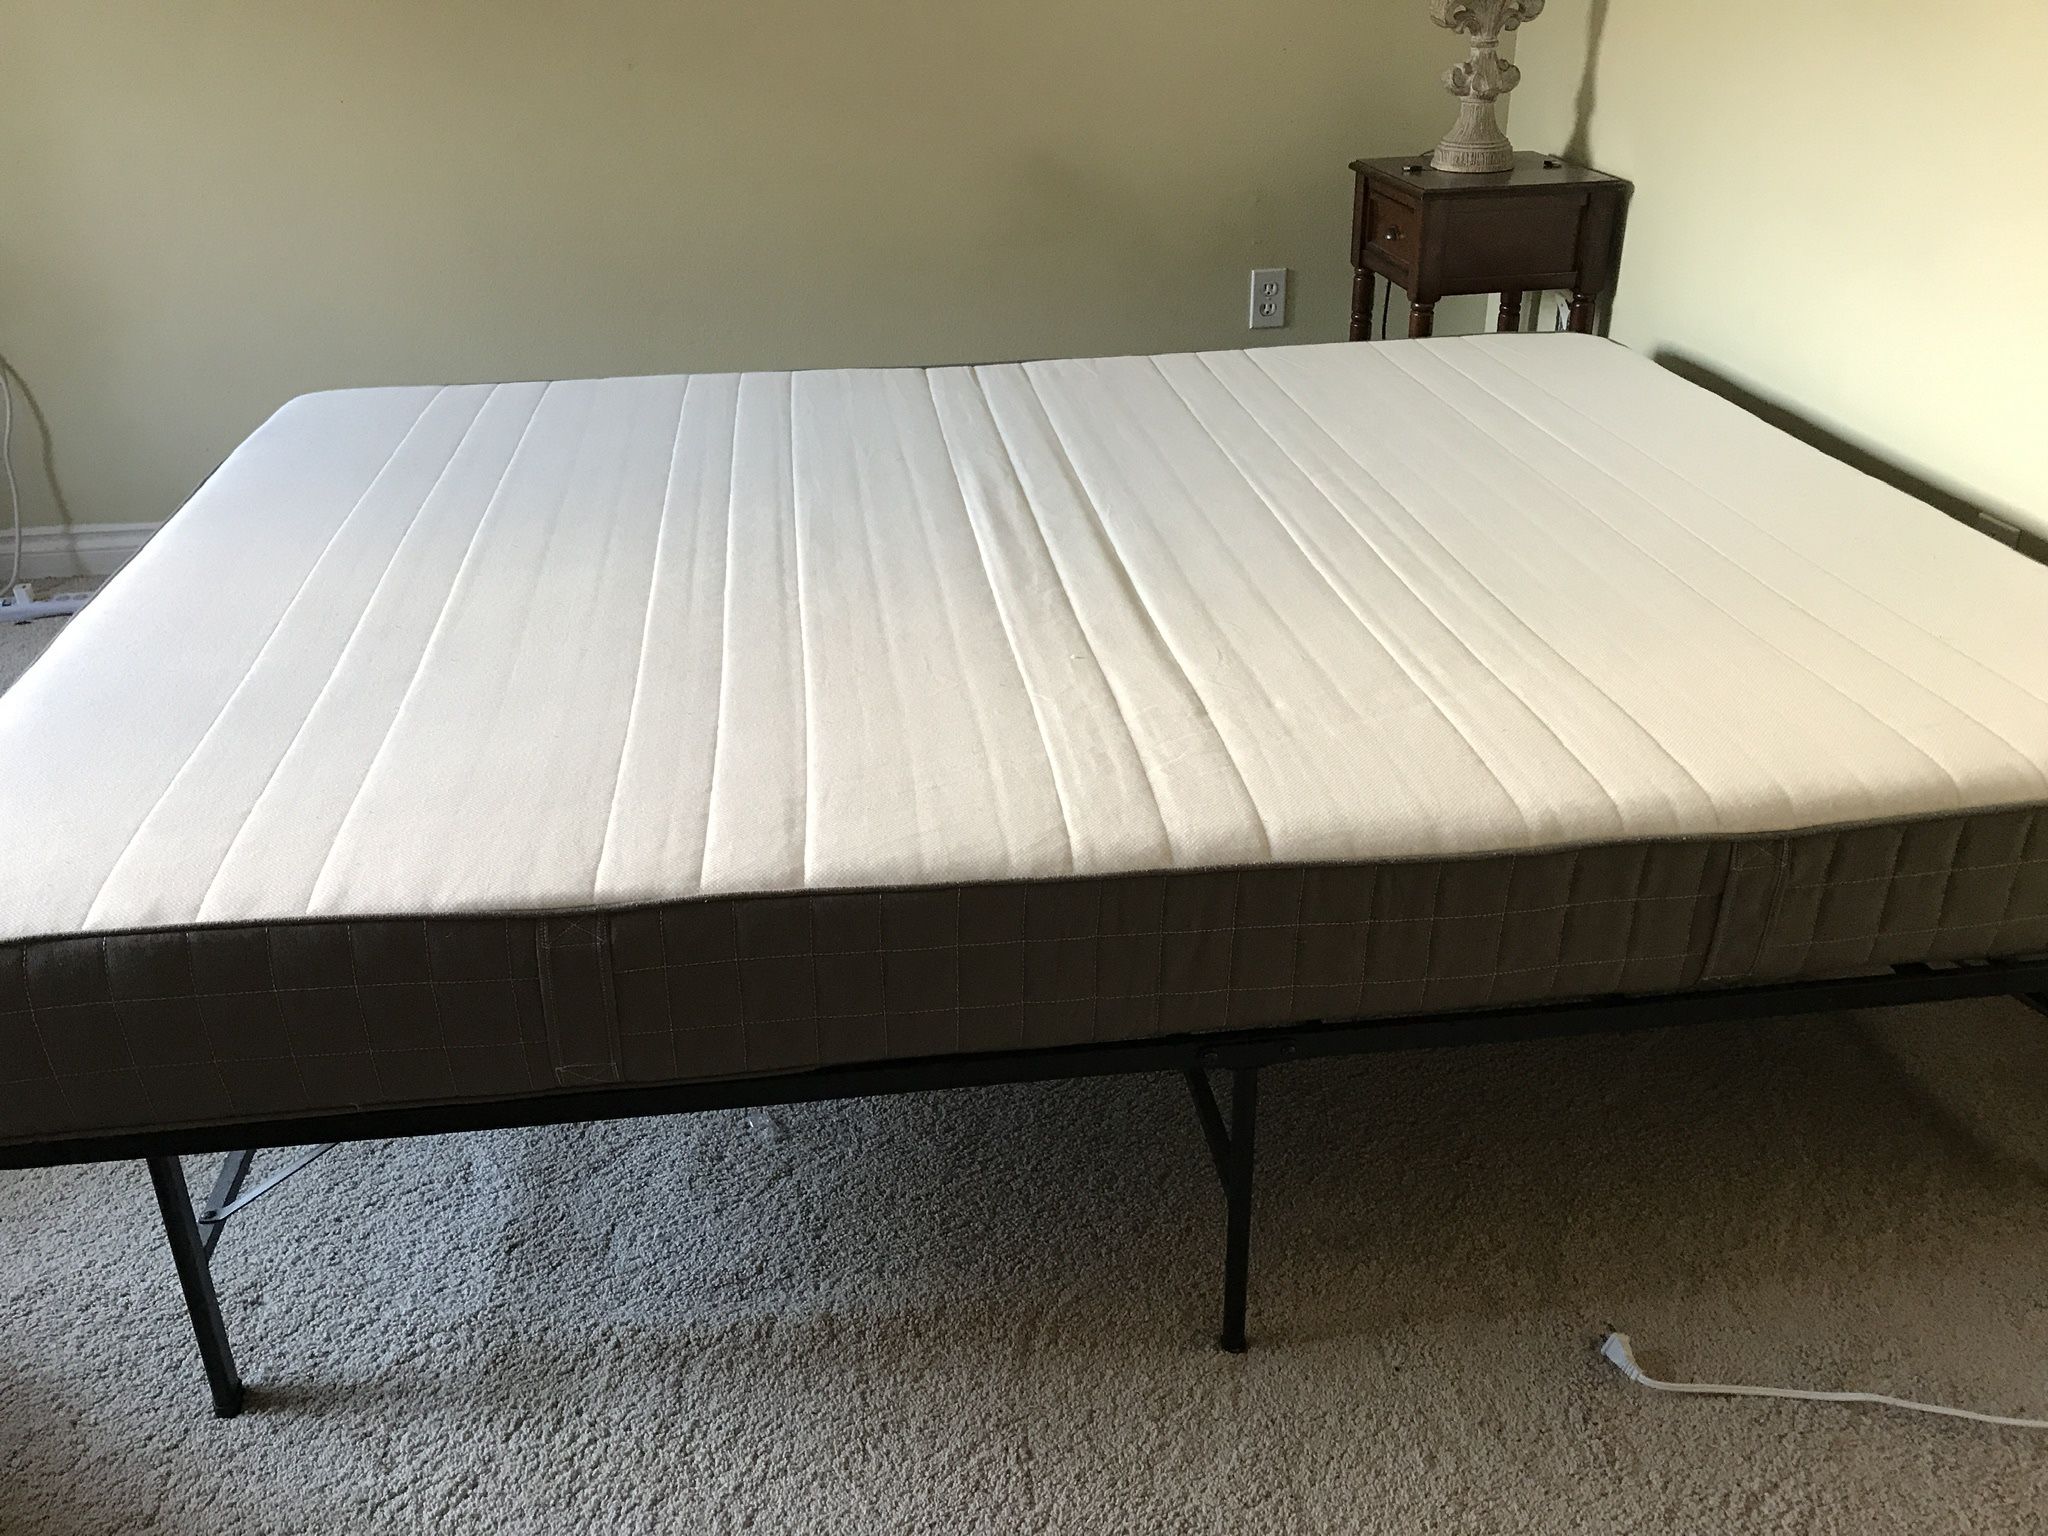 Queen-size mattress with bed frame